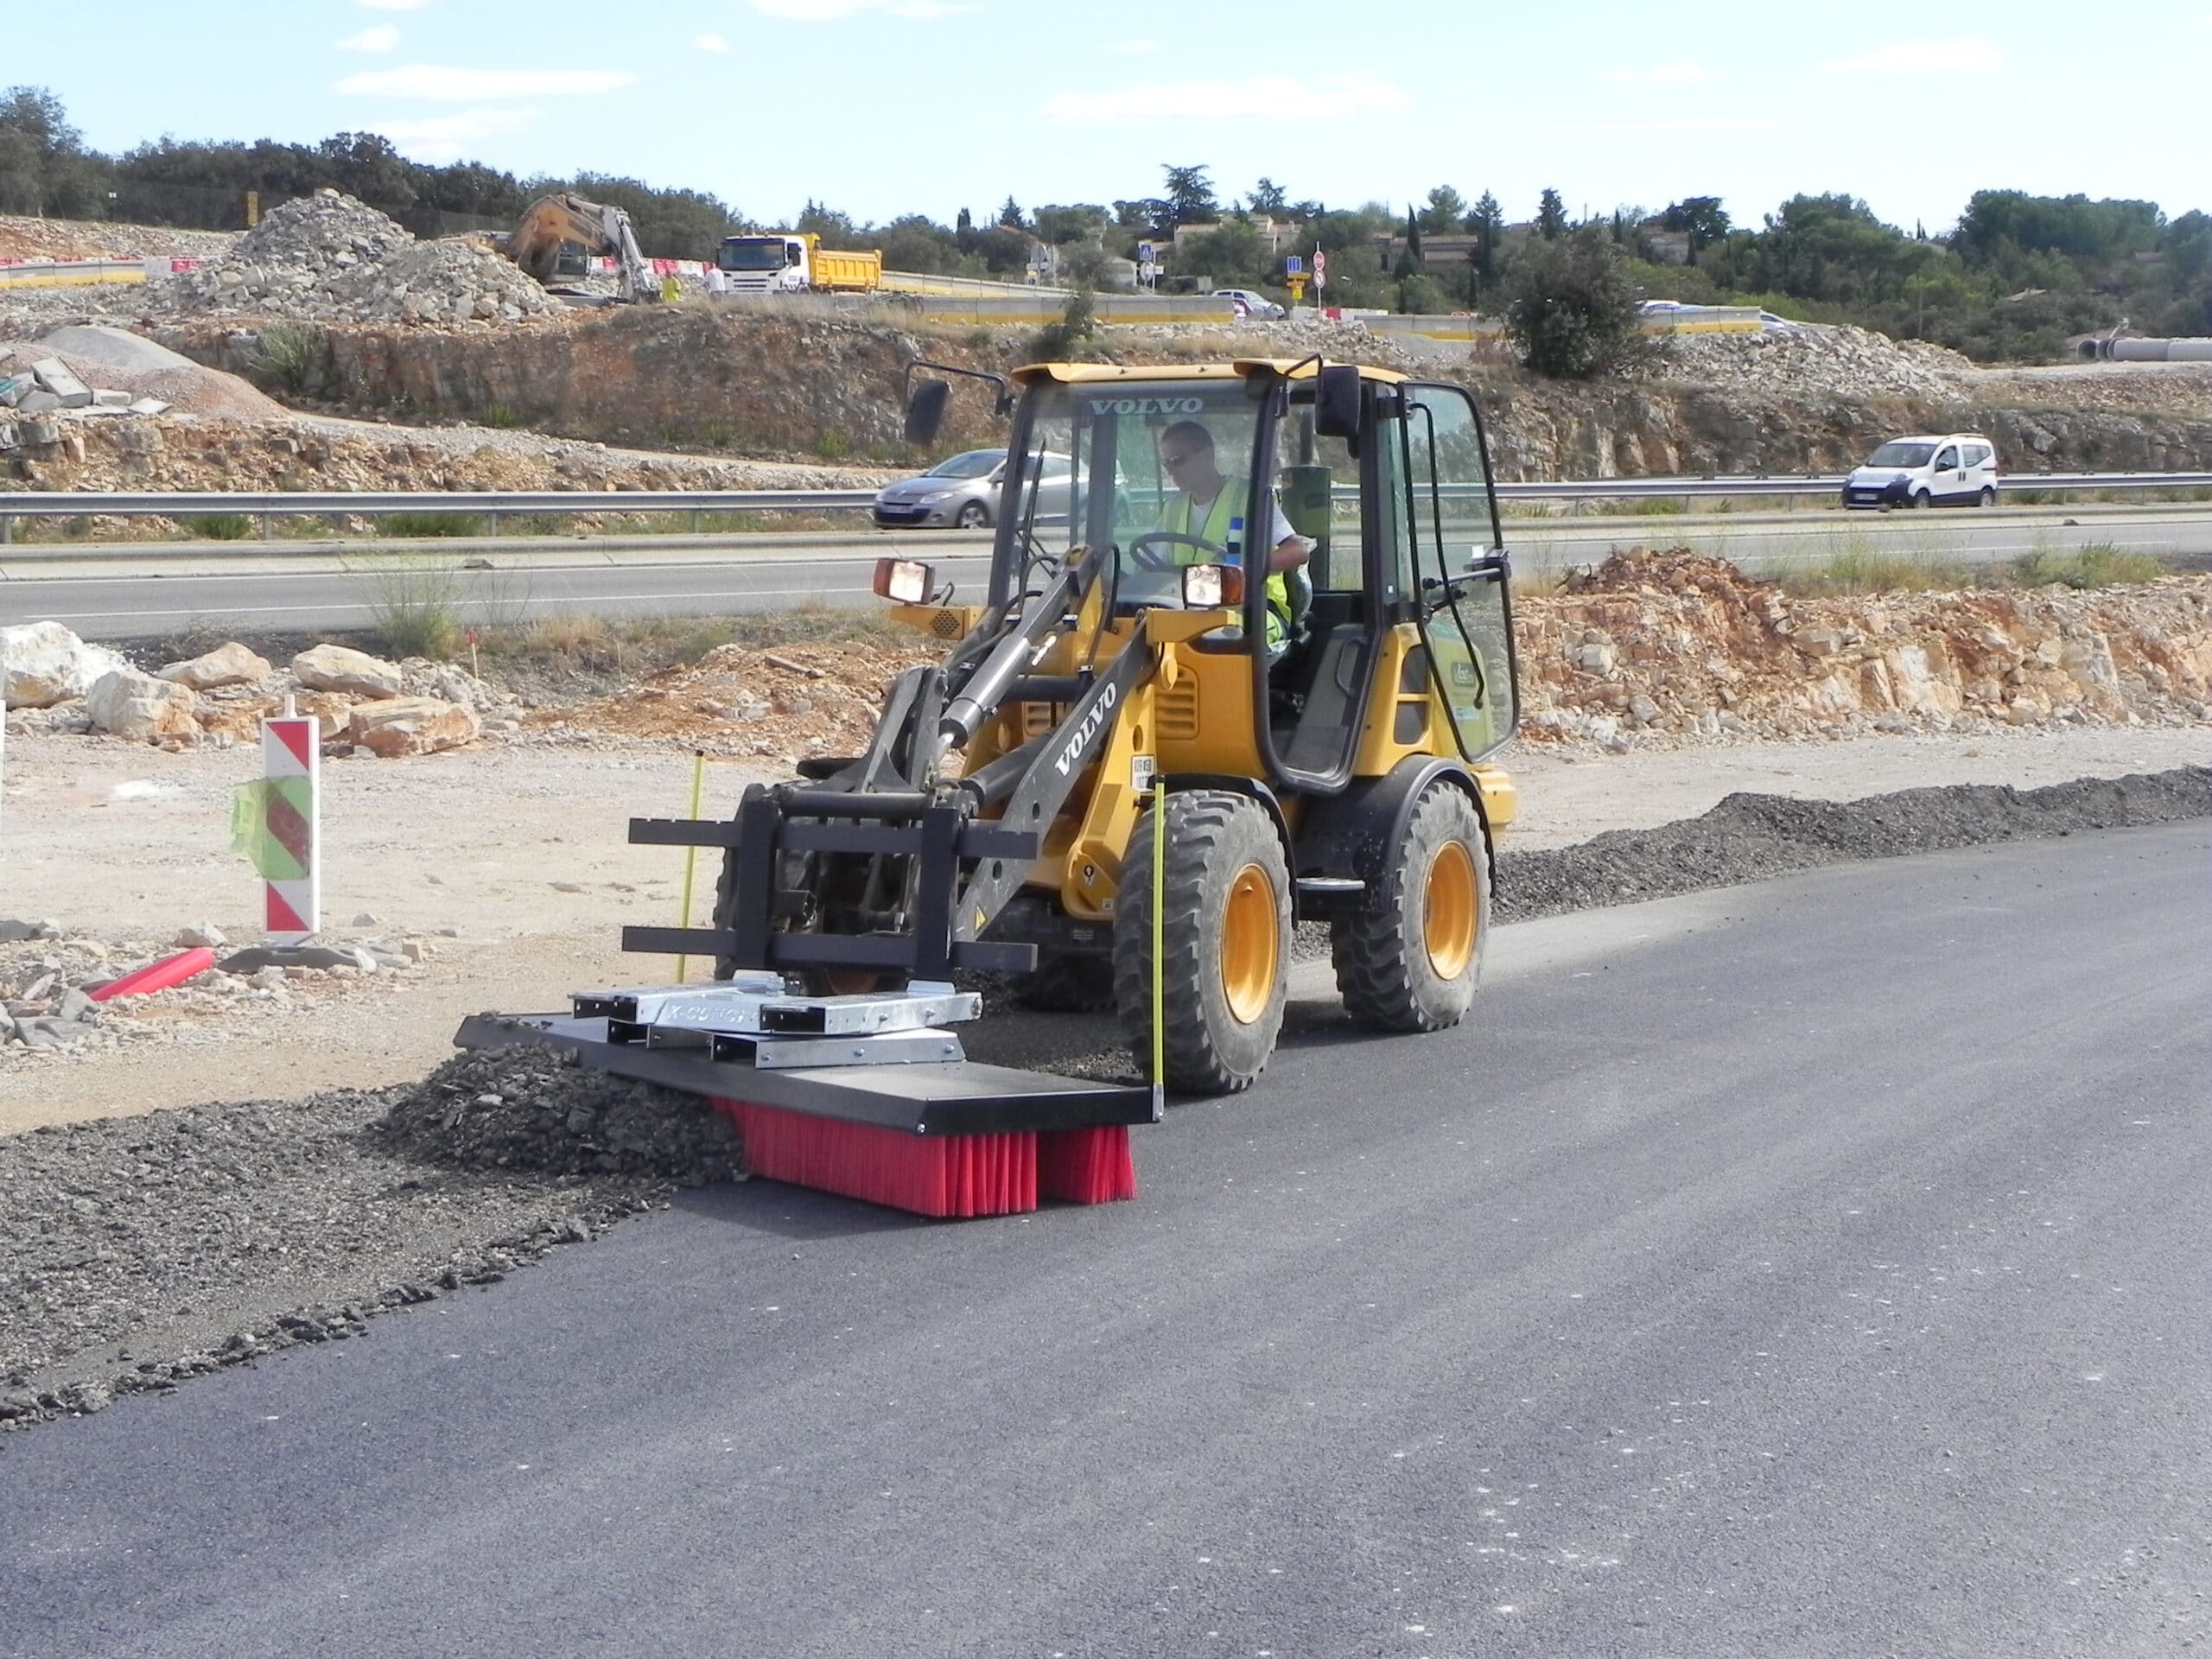 Actisweep road sweeper